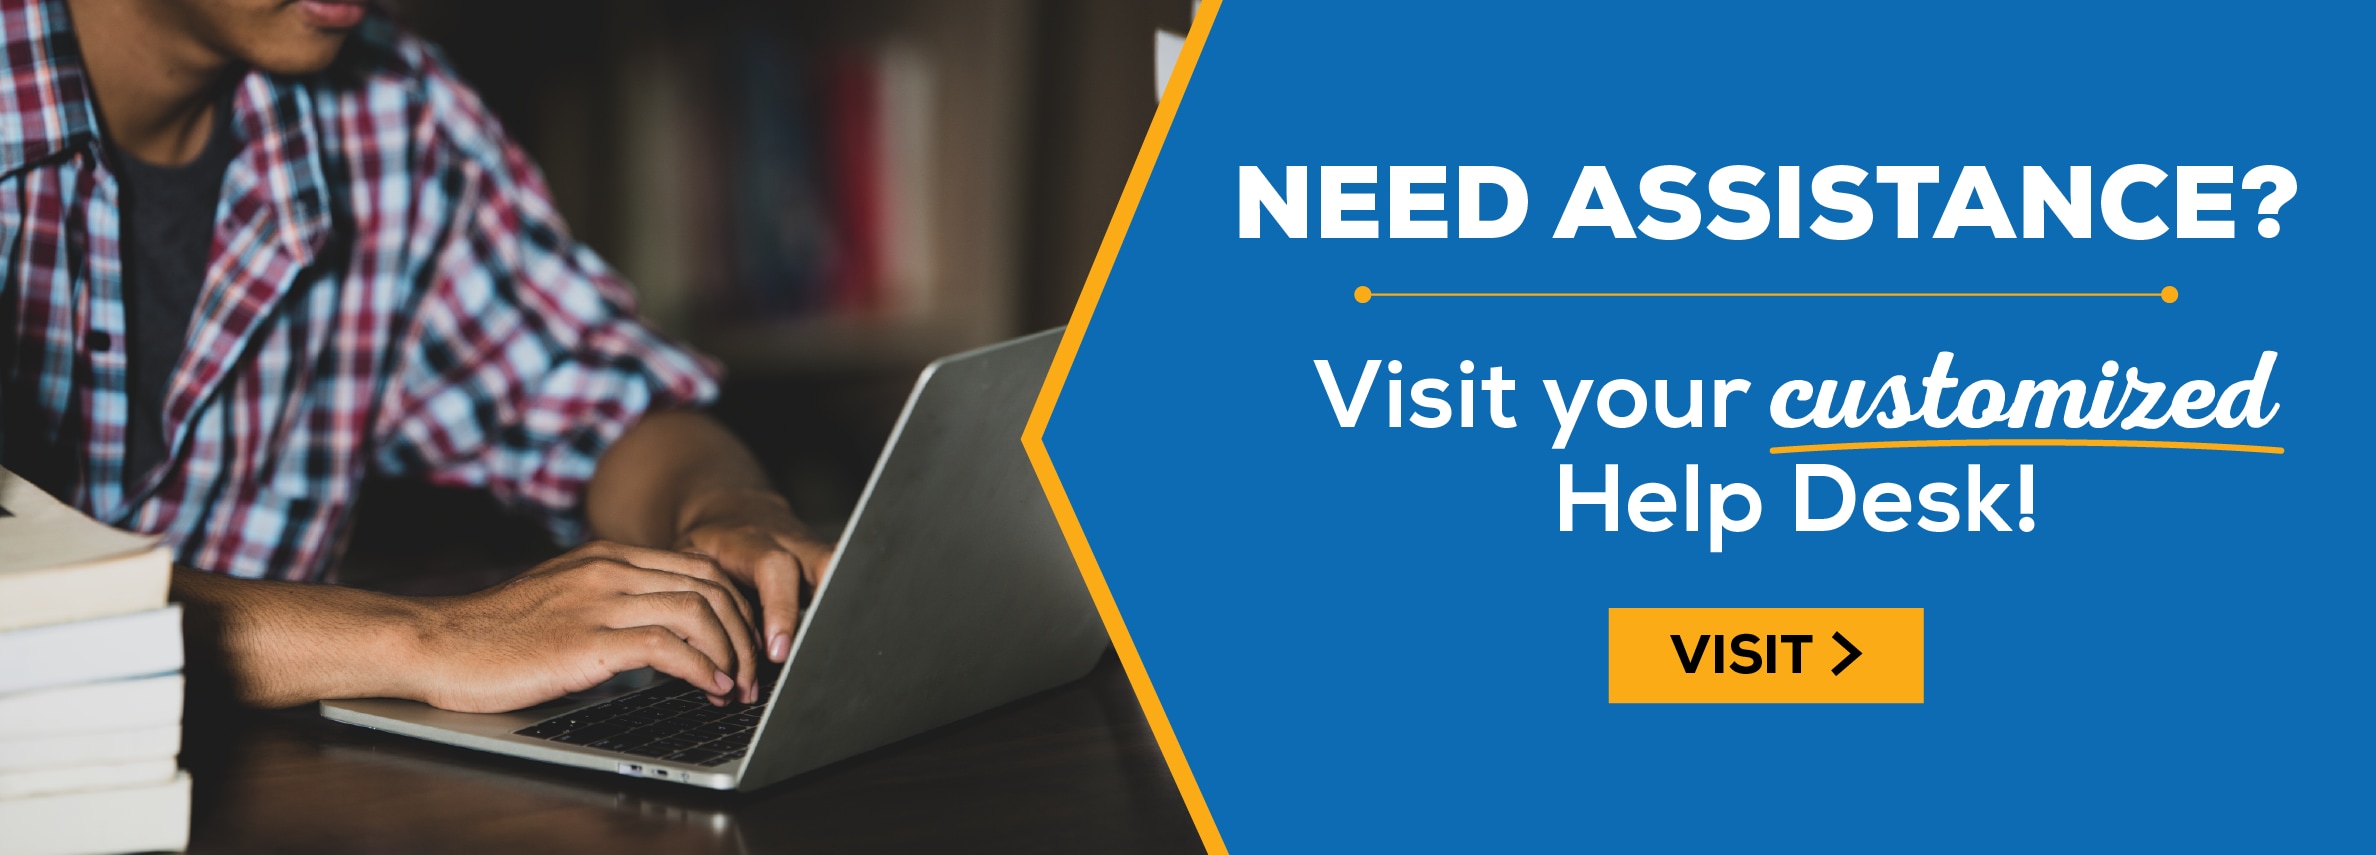 NEED ASSISTANCE? Visit your customized Help Desk! VISIT >